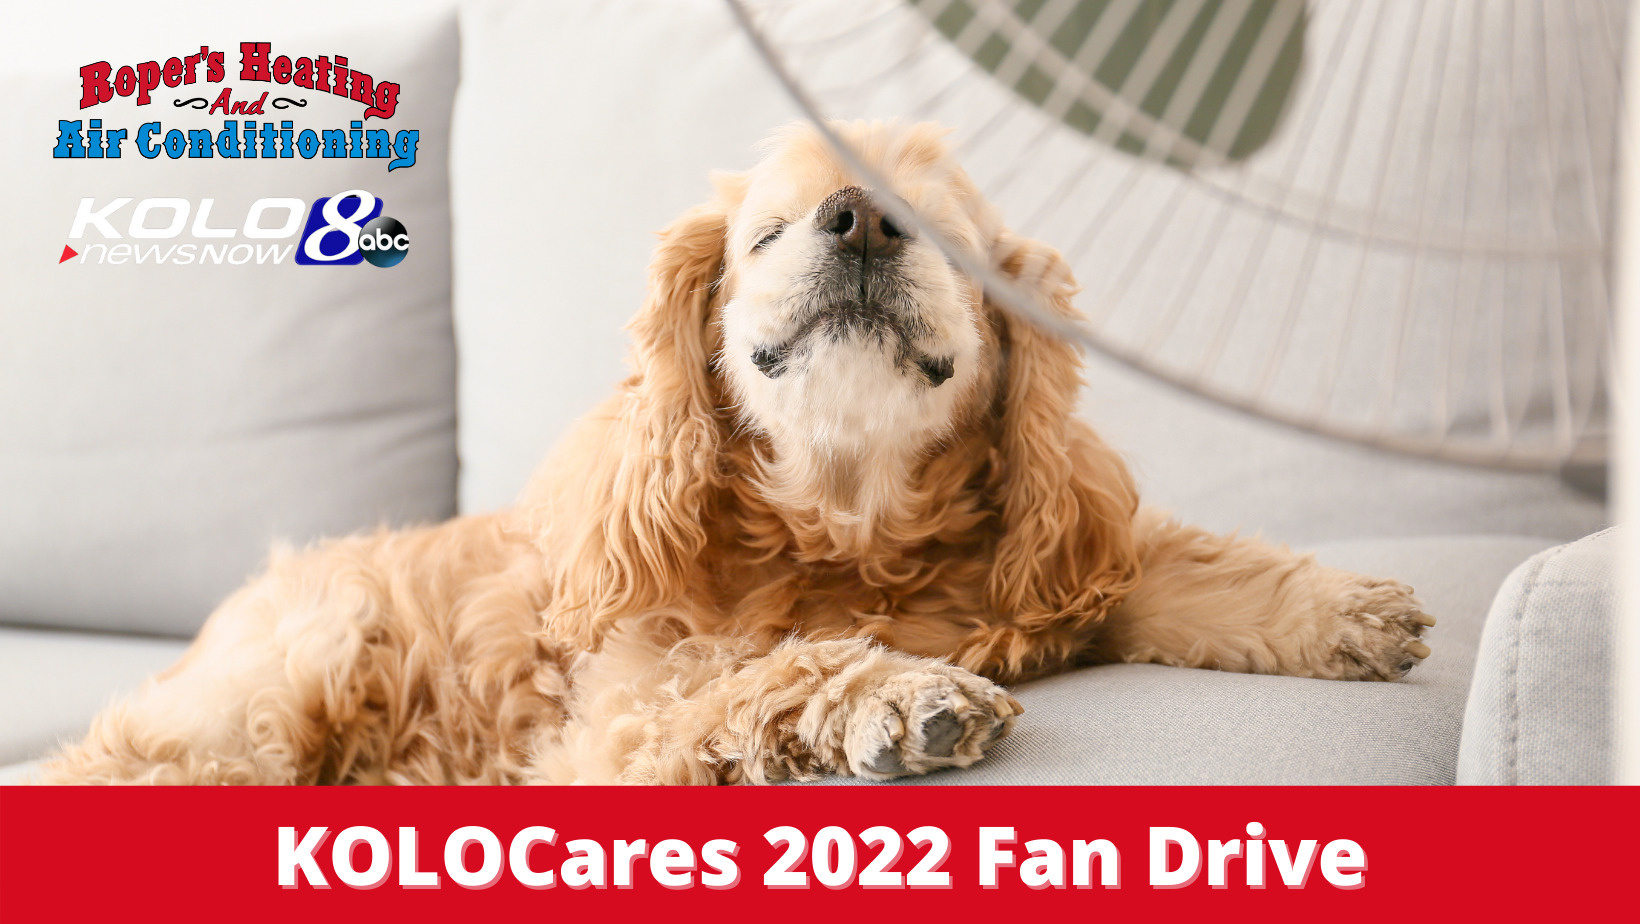 Dog laying on couch enjoying air from a table fan. Text is KOLOCares 2022 Fan Drive